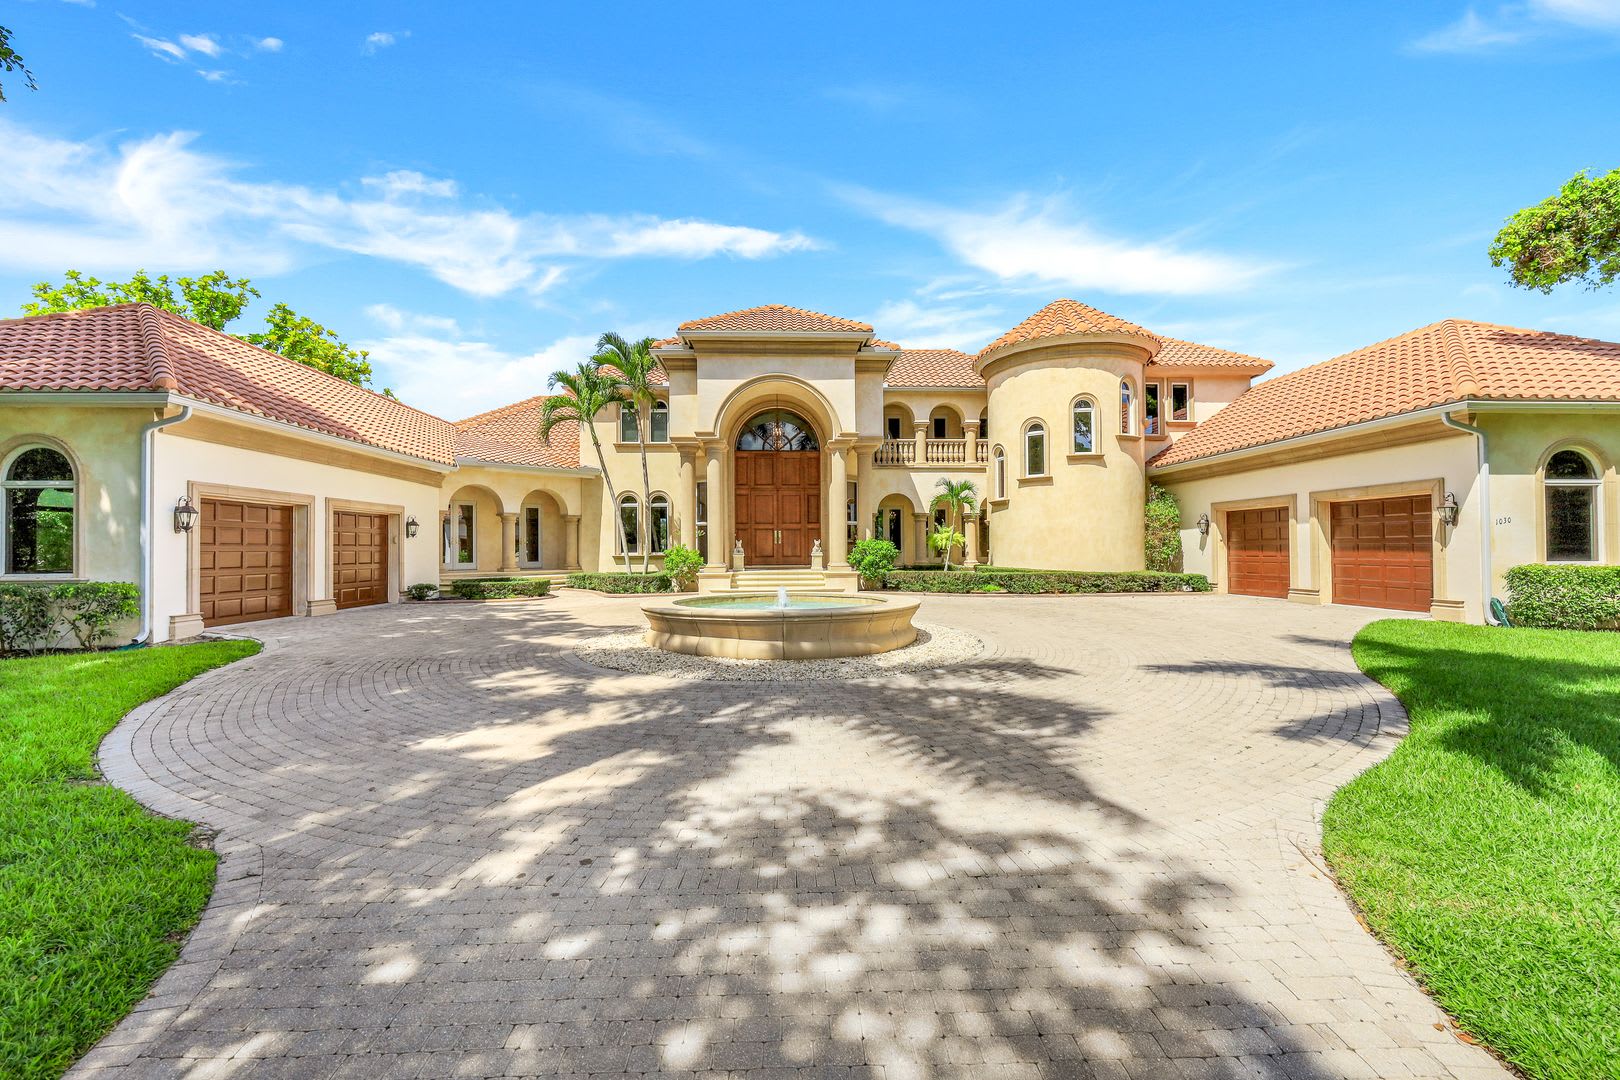 Property Image 2 - A Port Royal Manor- Prestige, Luxury and Elegance With a Coastal Flair